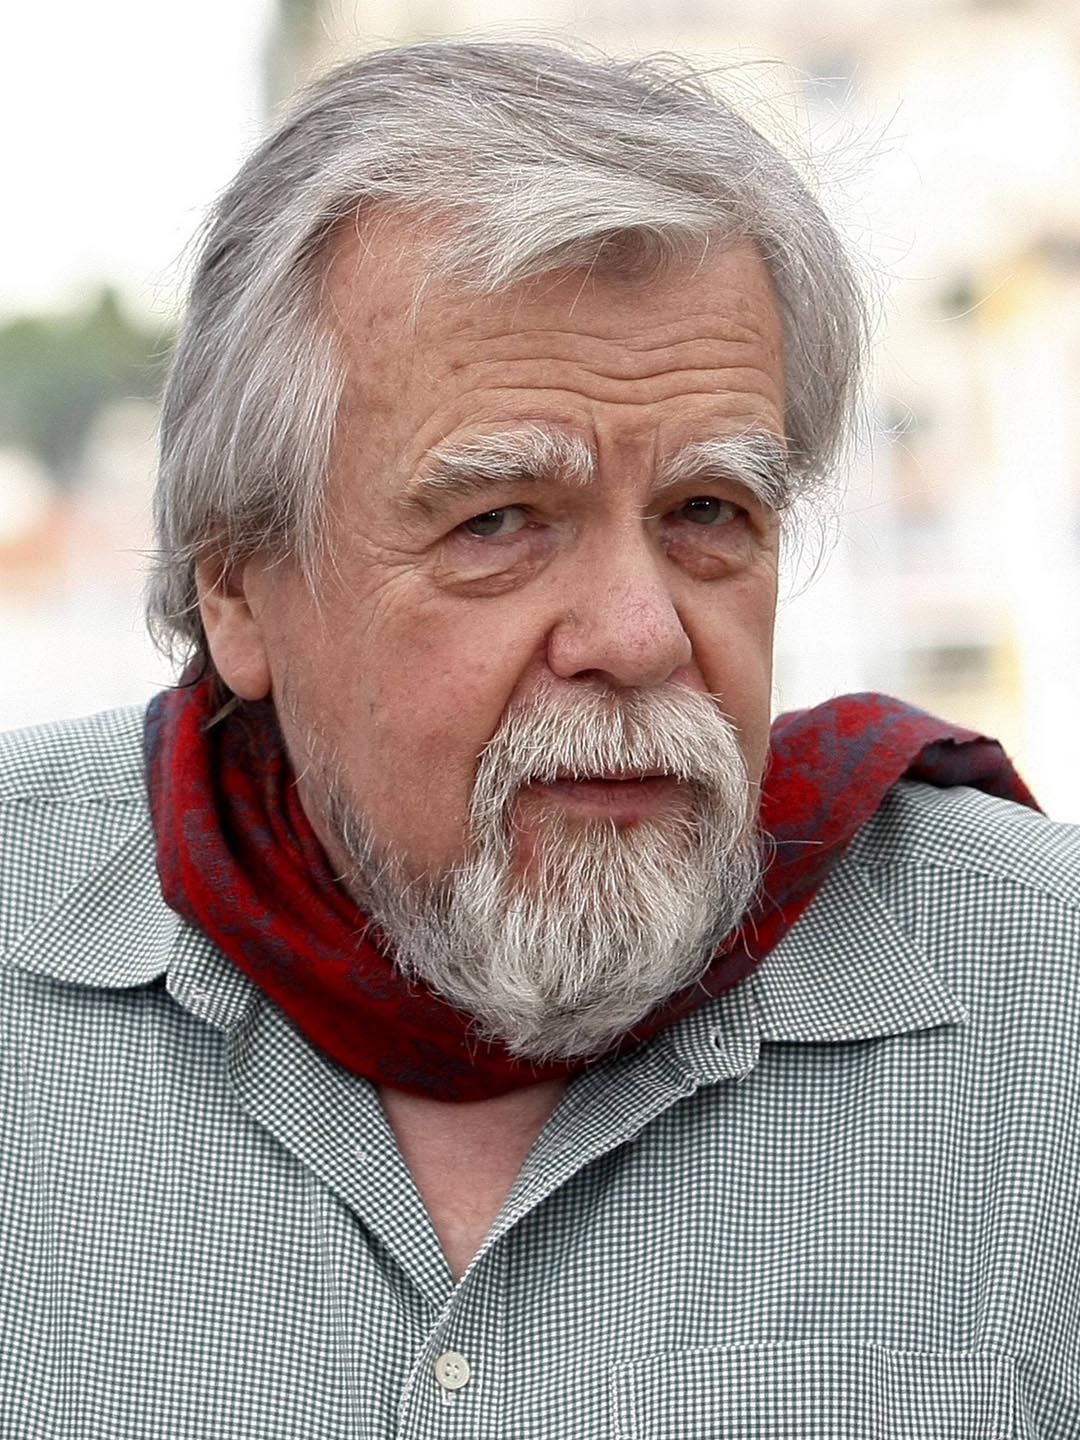 How tall is Michael Lonsdale?